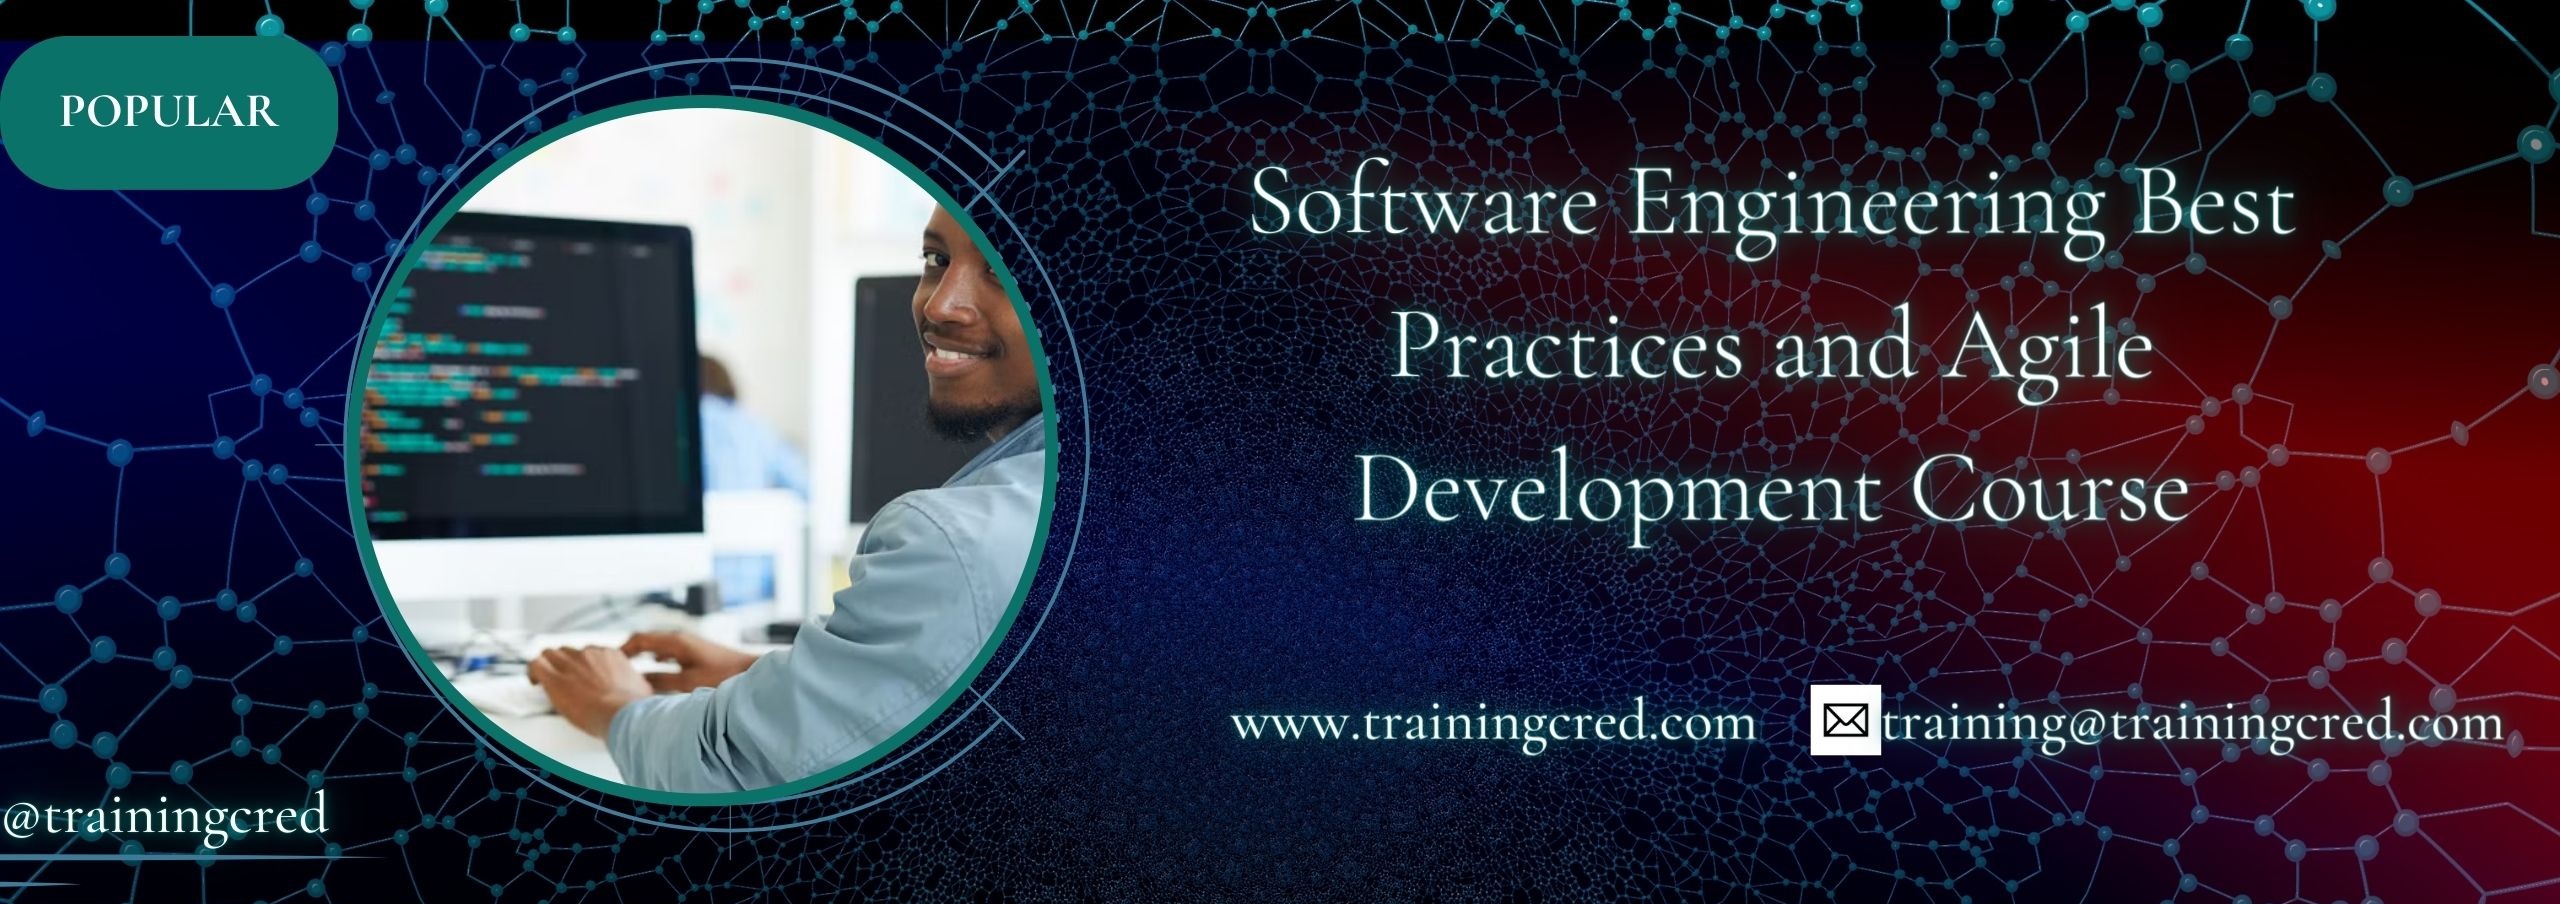 Software Engineering Best Practices and Agile Development